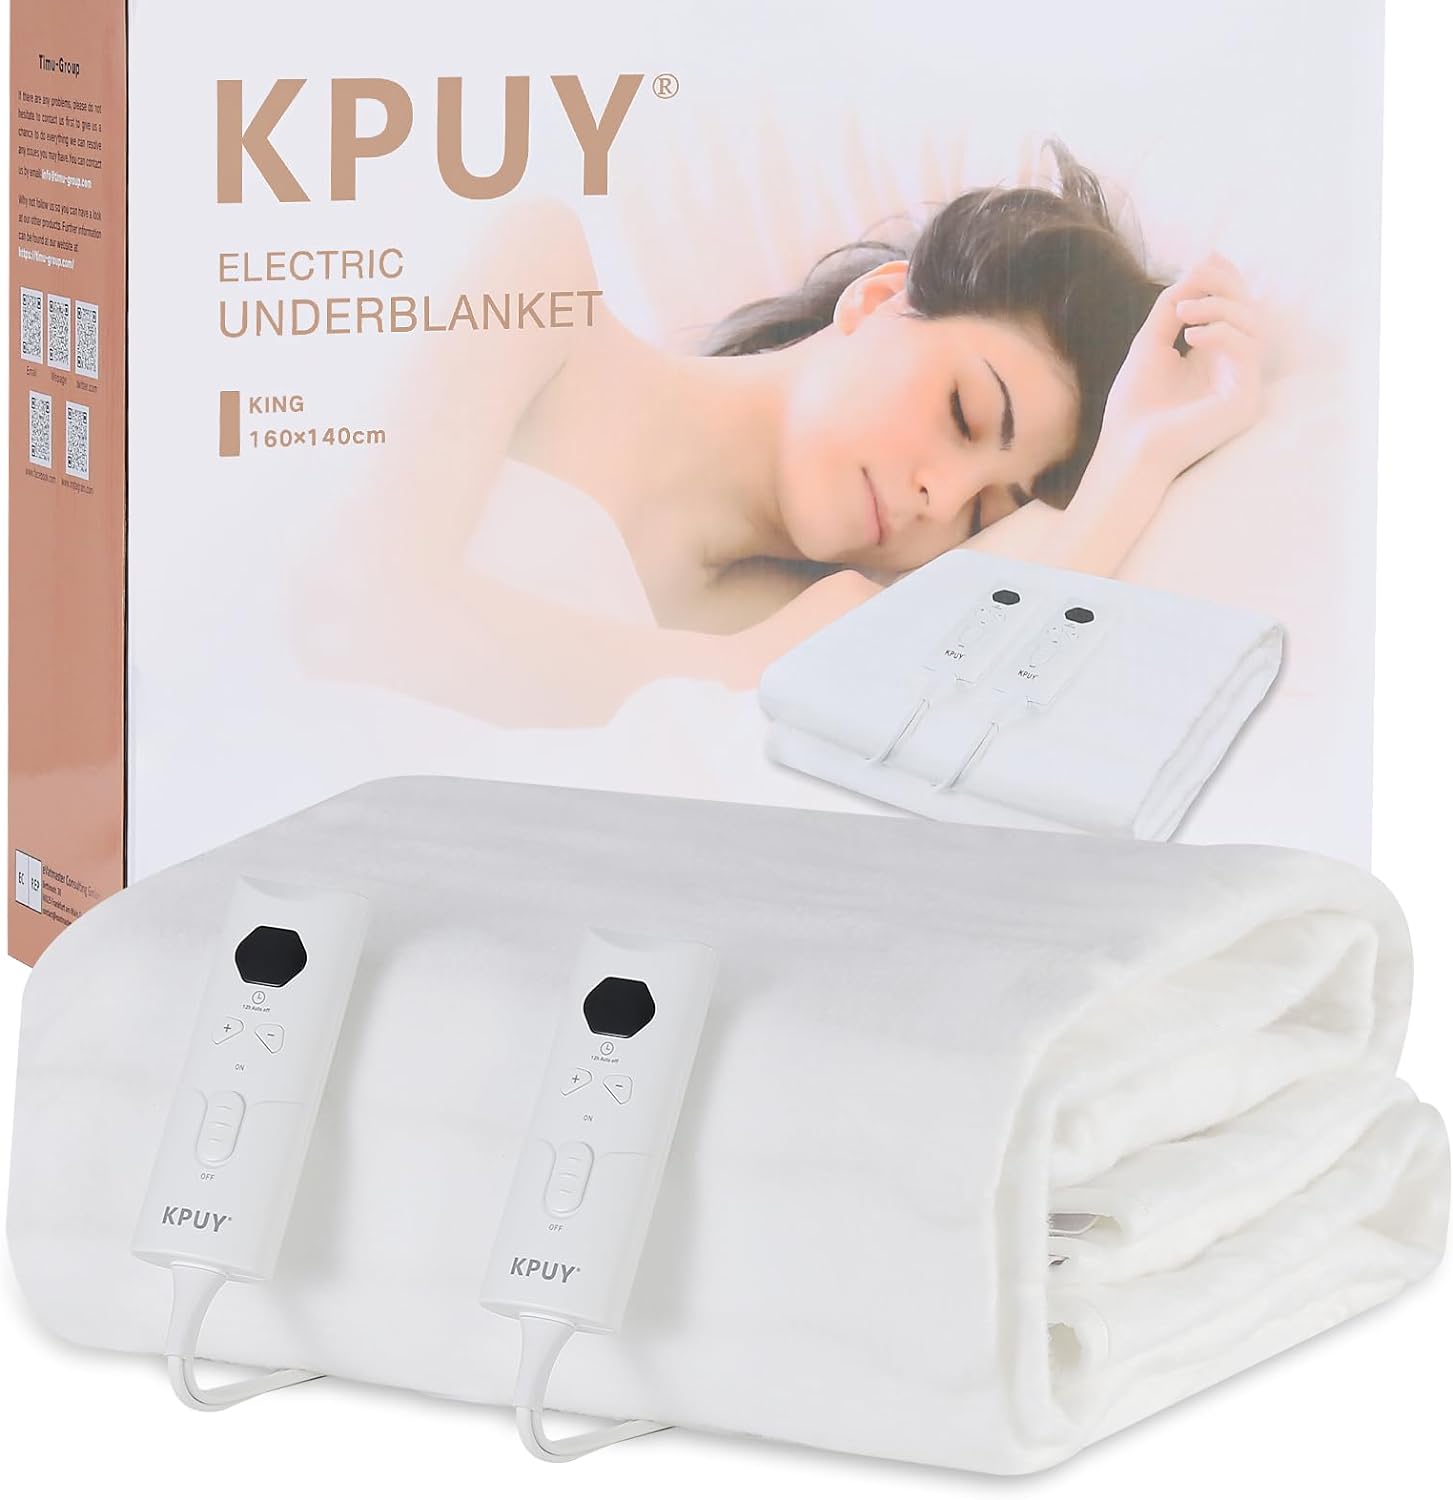 Hurry! Exclusive Promo on KPUY Premium Dual Control Electric Heated Blankets - Unlock Your Savings Now!